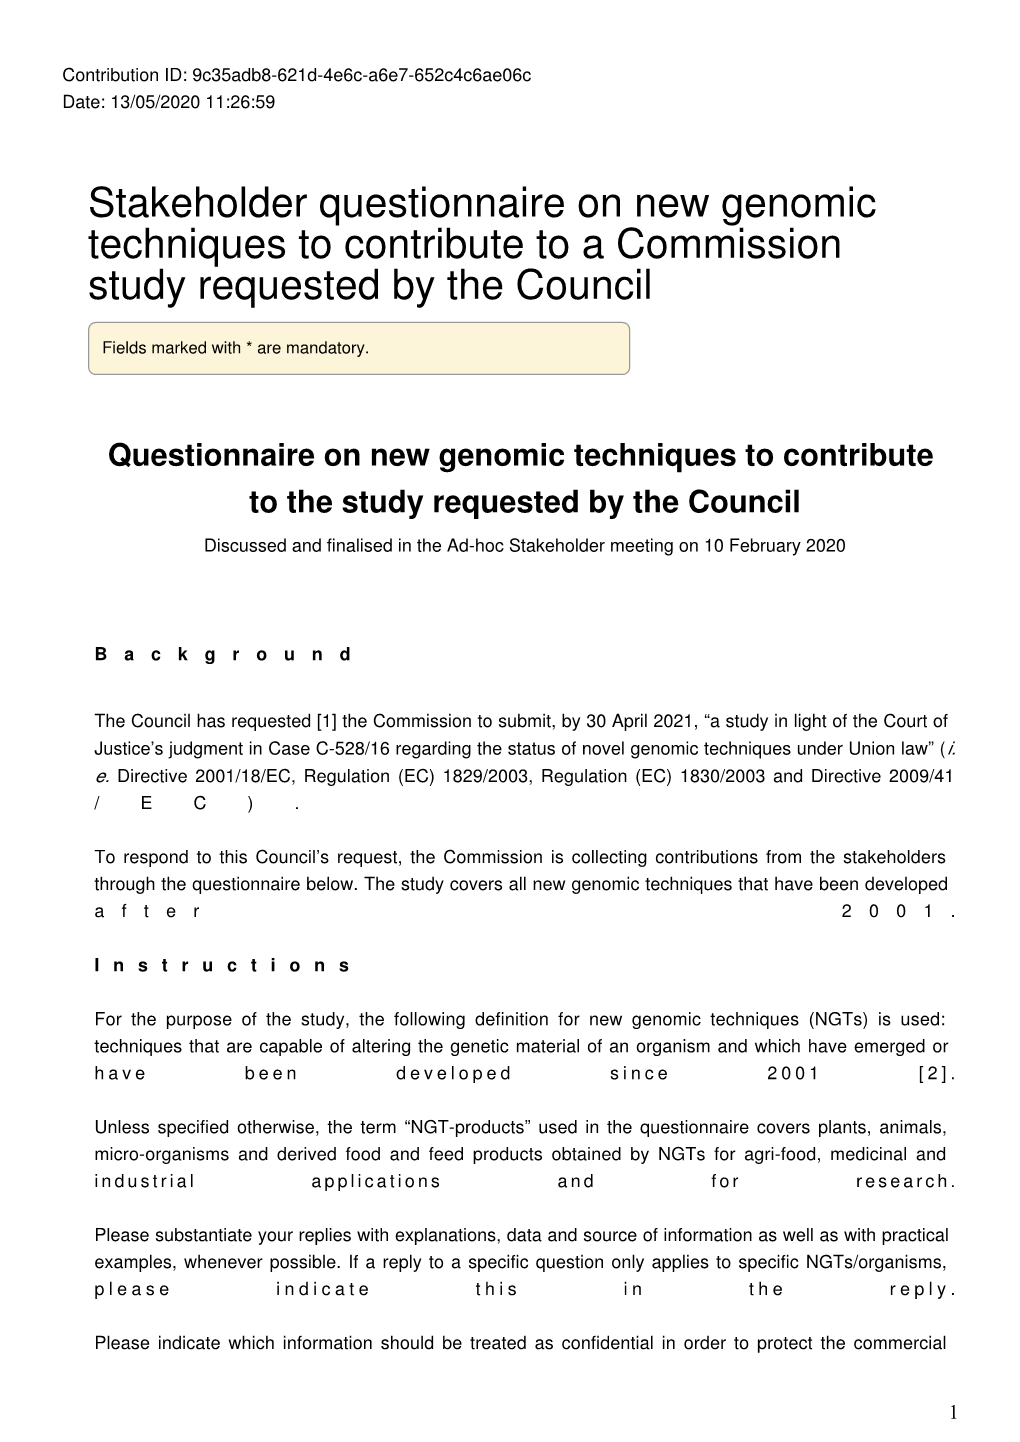 Stakeholder Questionnaire on New Genomic Techniques to Contribute to a Commission Study Requested by the Council